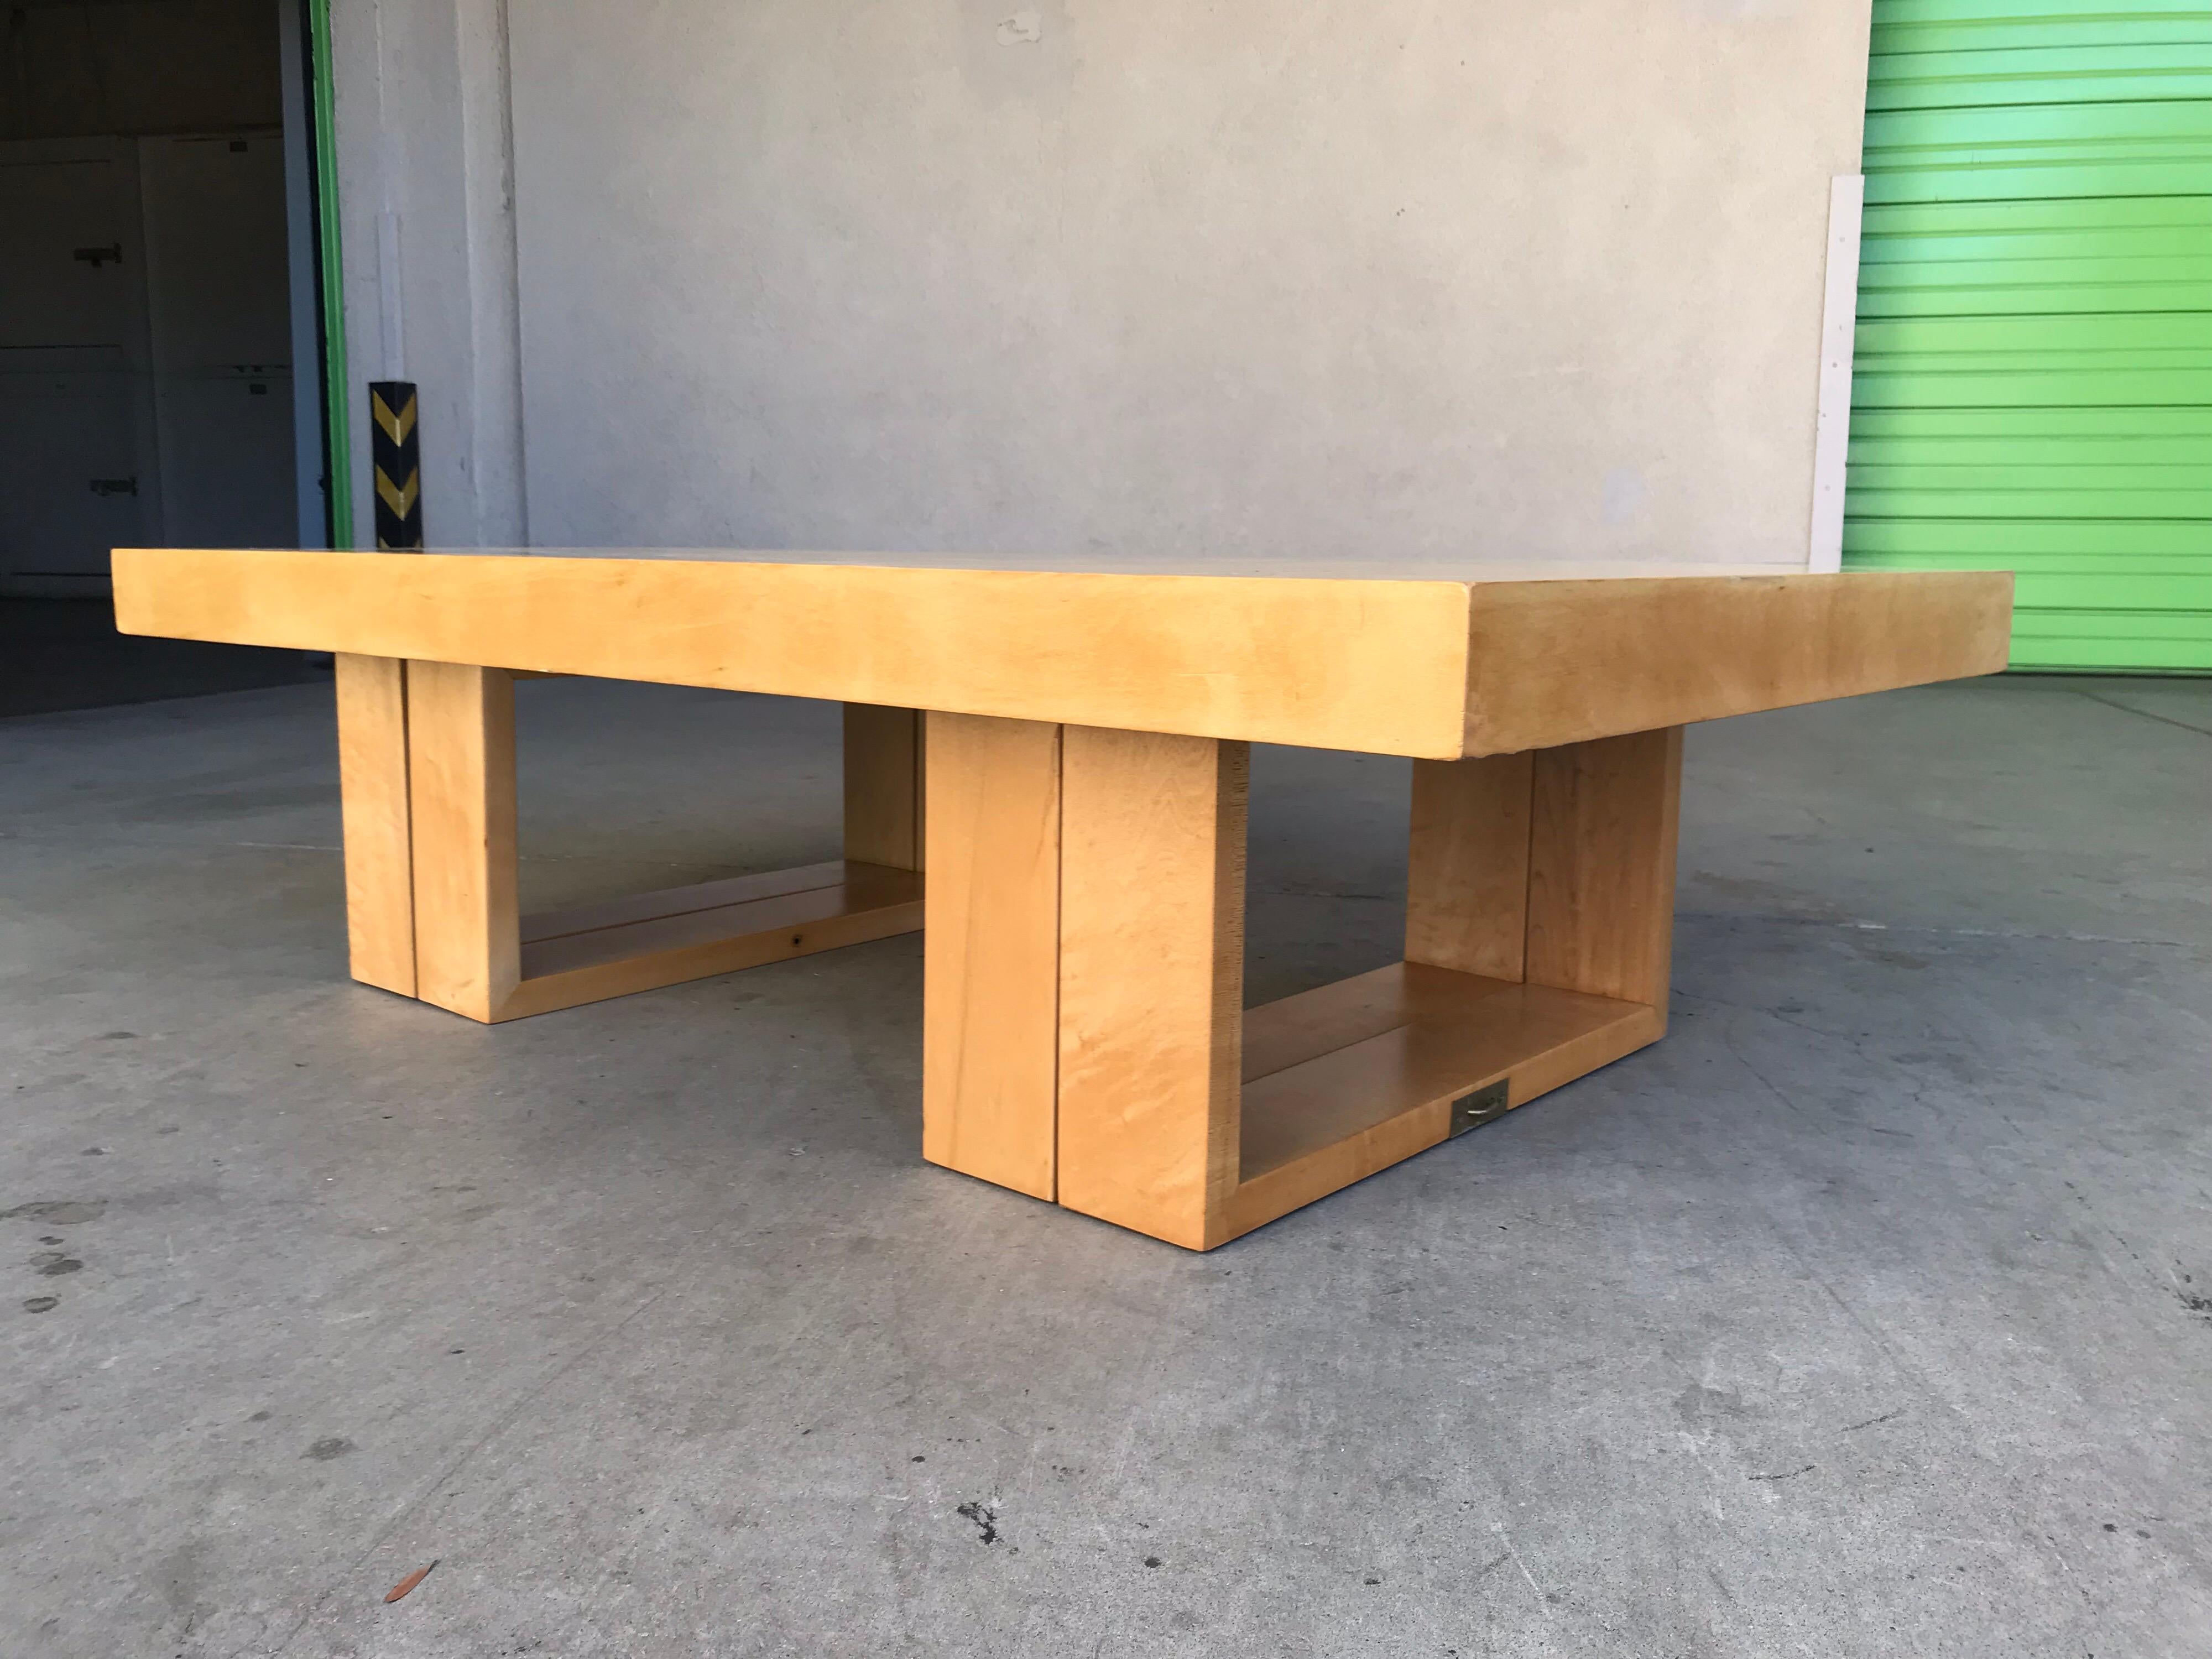 Ultra Modern California design.
This is an early production piece with the old Beverly Hills label, circa 1940s. 
It was later manufactured in the 1950s by Brown & Saltman in mahogany.
Made of solid birch wood (no press-board) and brass hardware.
A